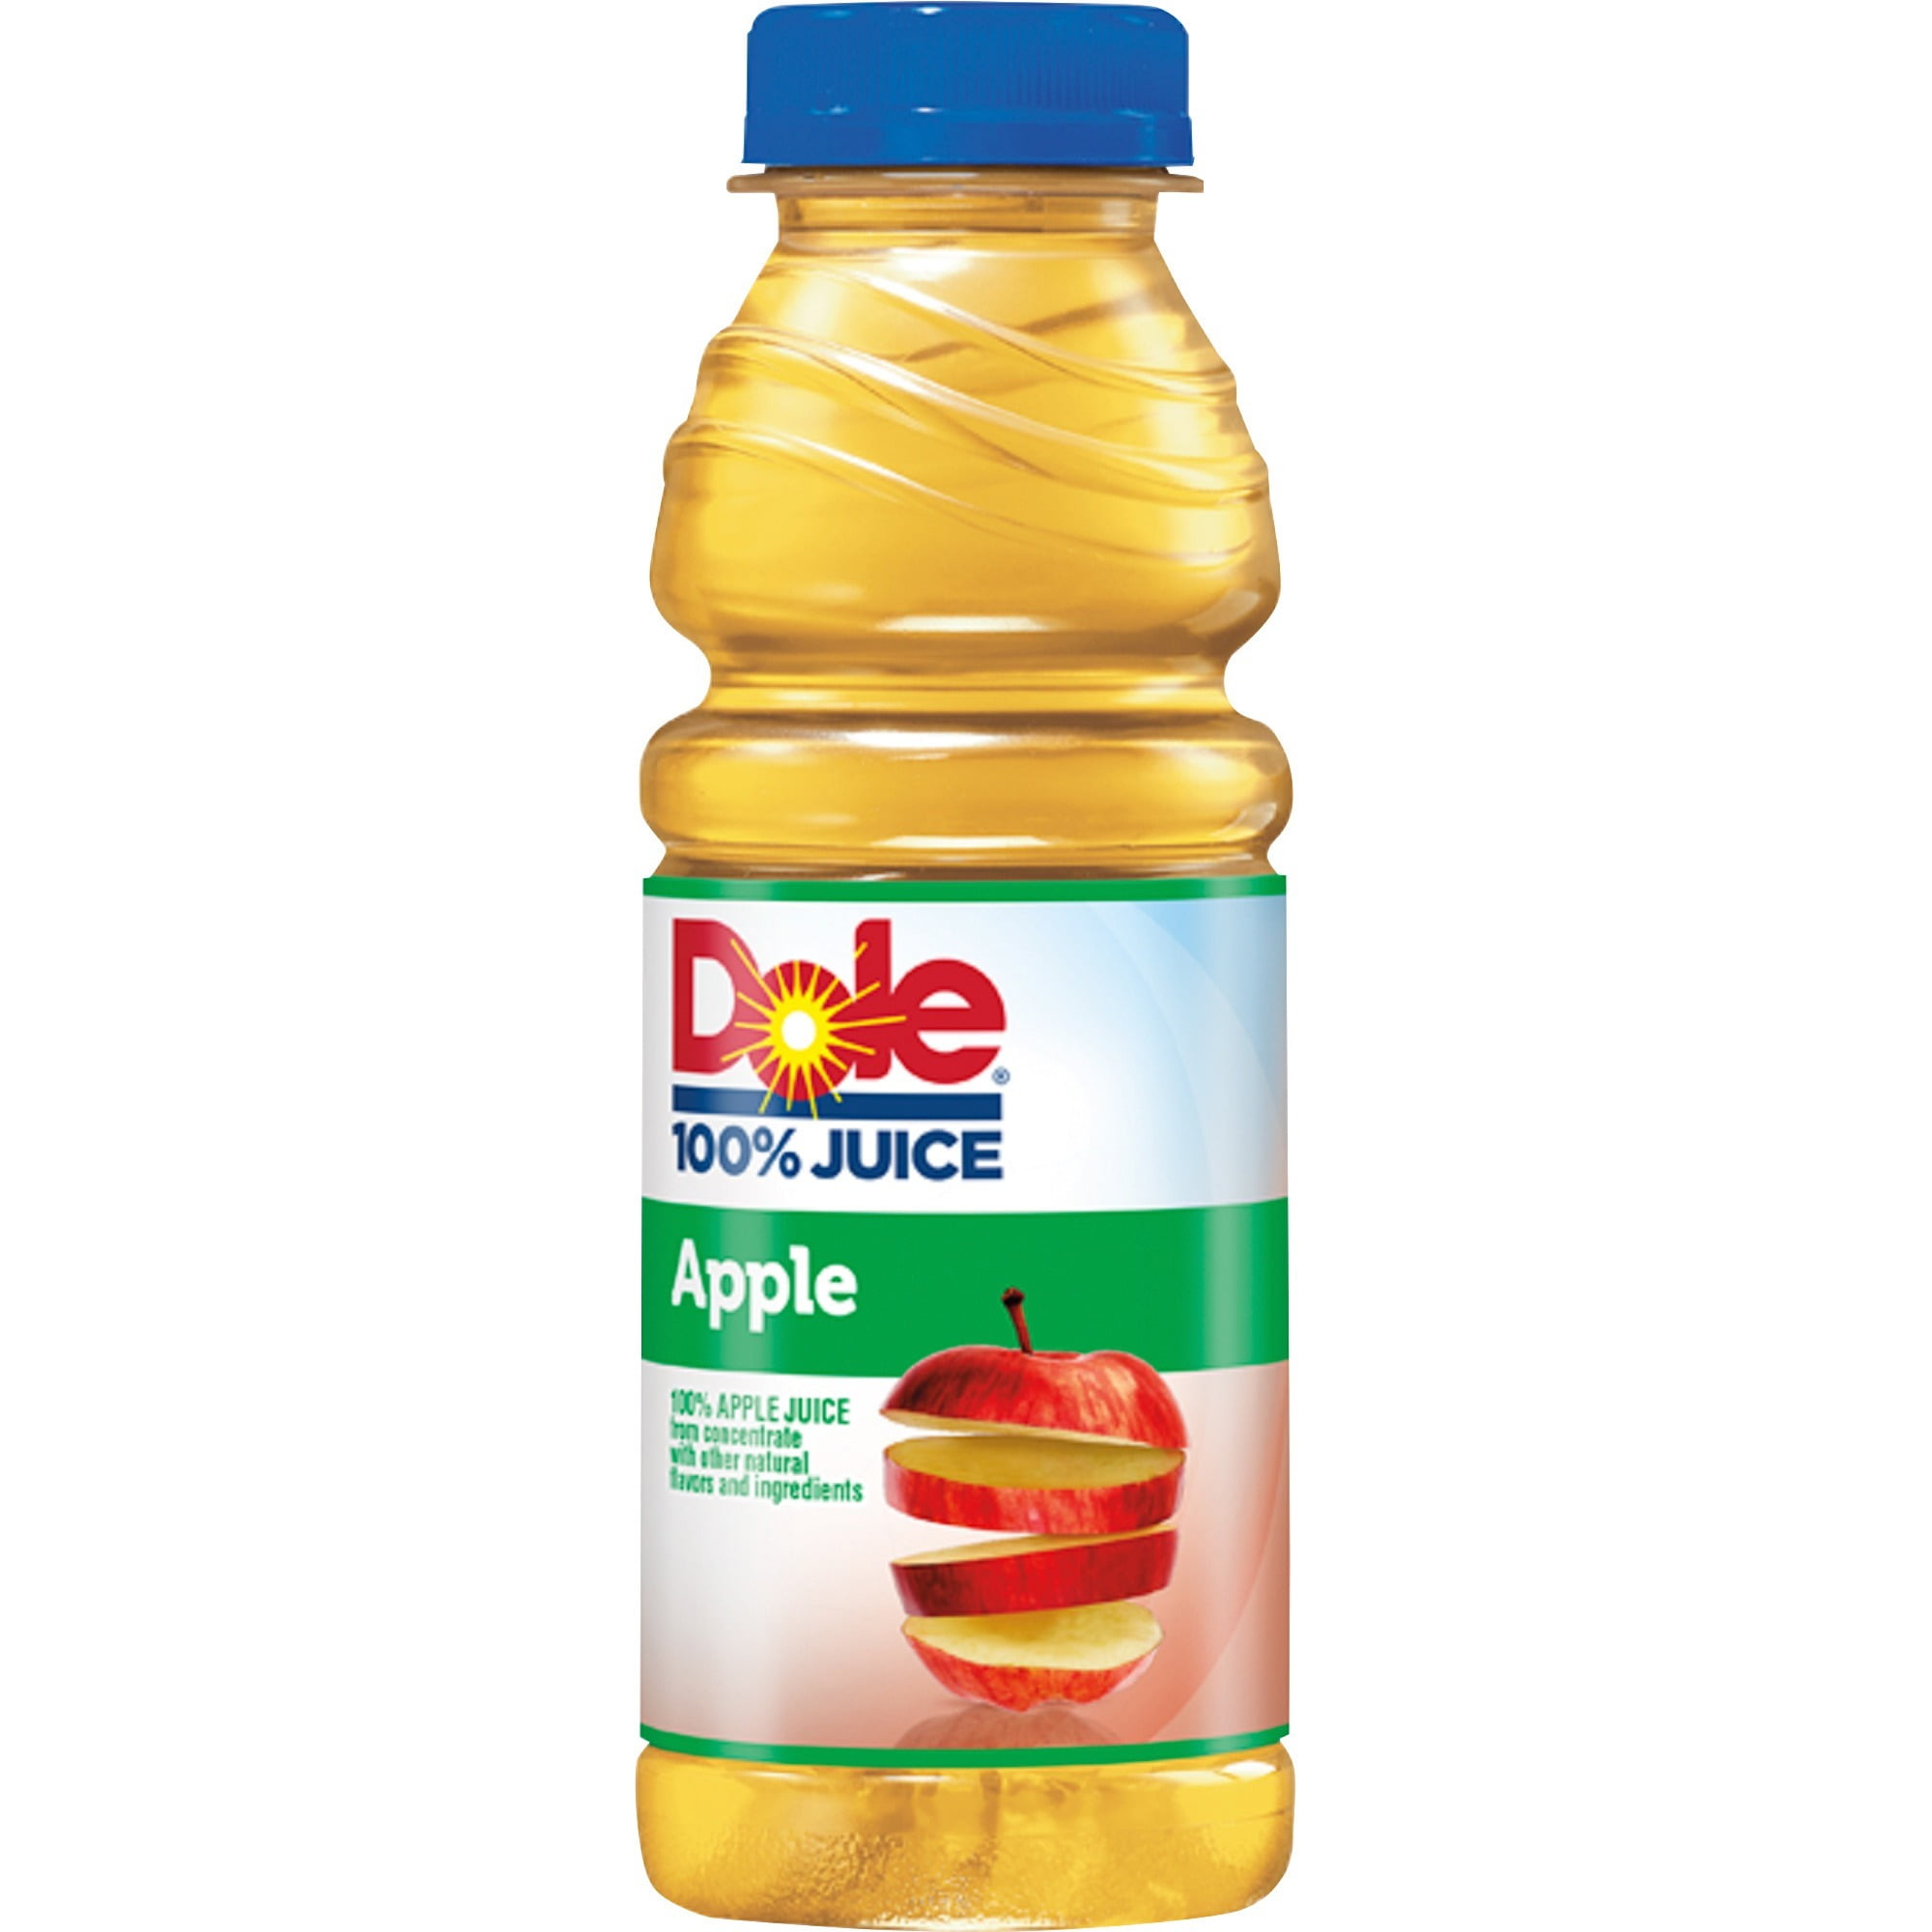 How To Make Apple Juice Typical Of Grobogan City